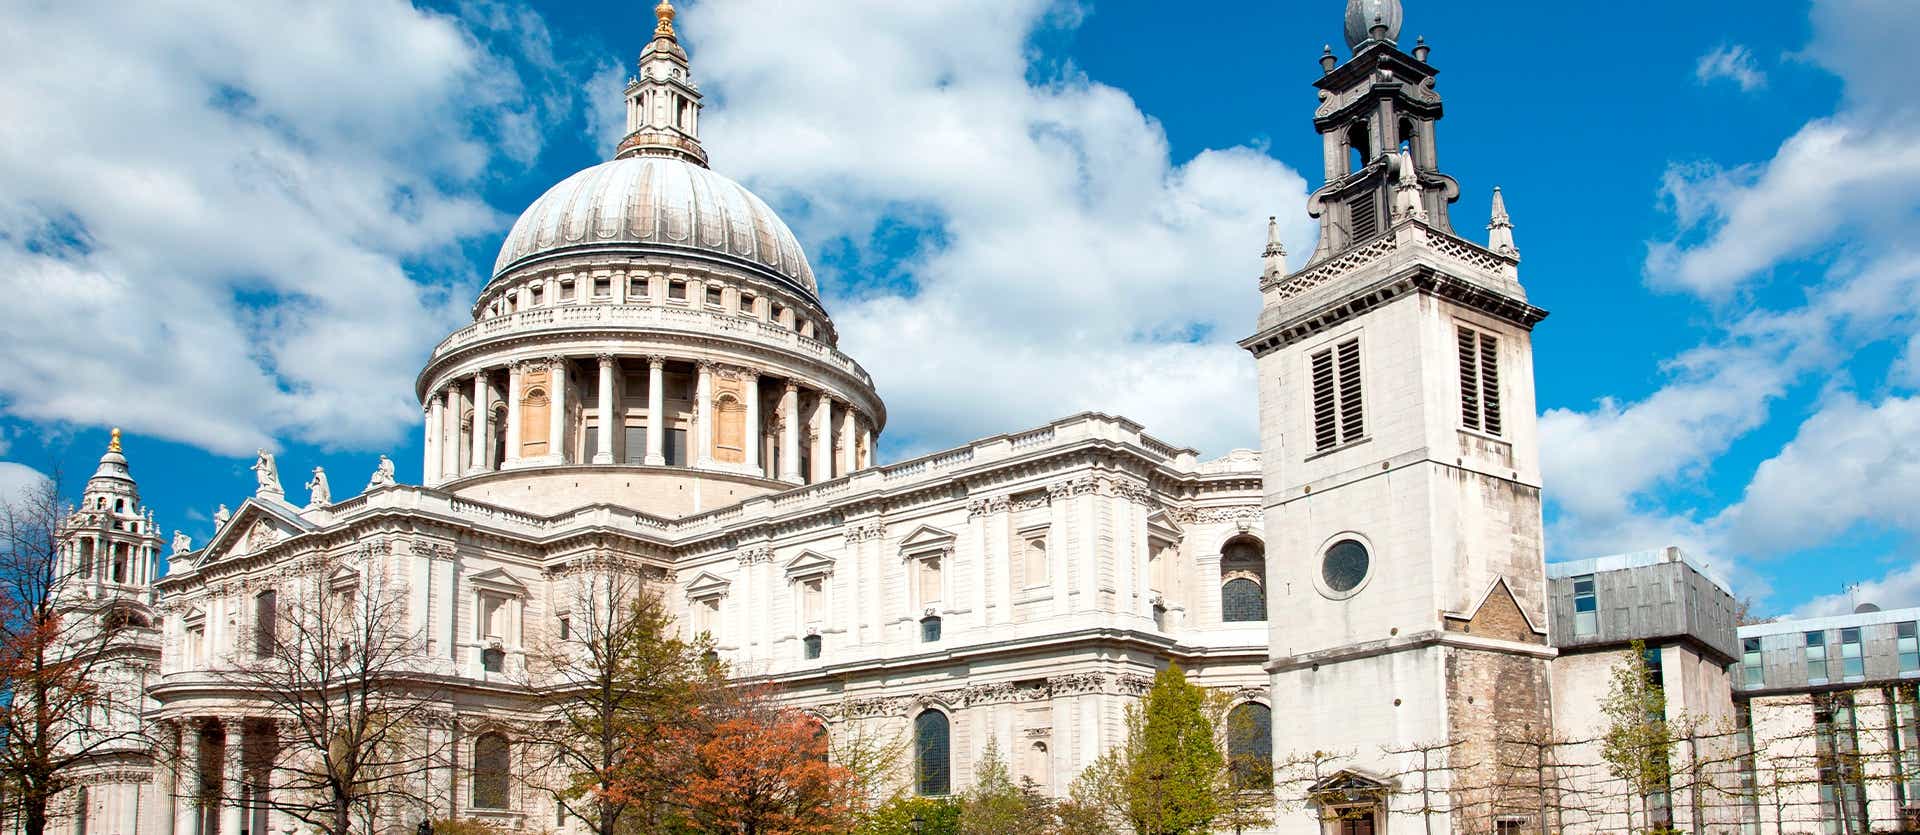 St. Paul's Cathedral <span class="iconos separador"></span> London <span class="iconos separador"></span> England